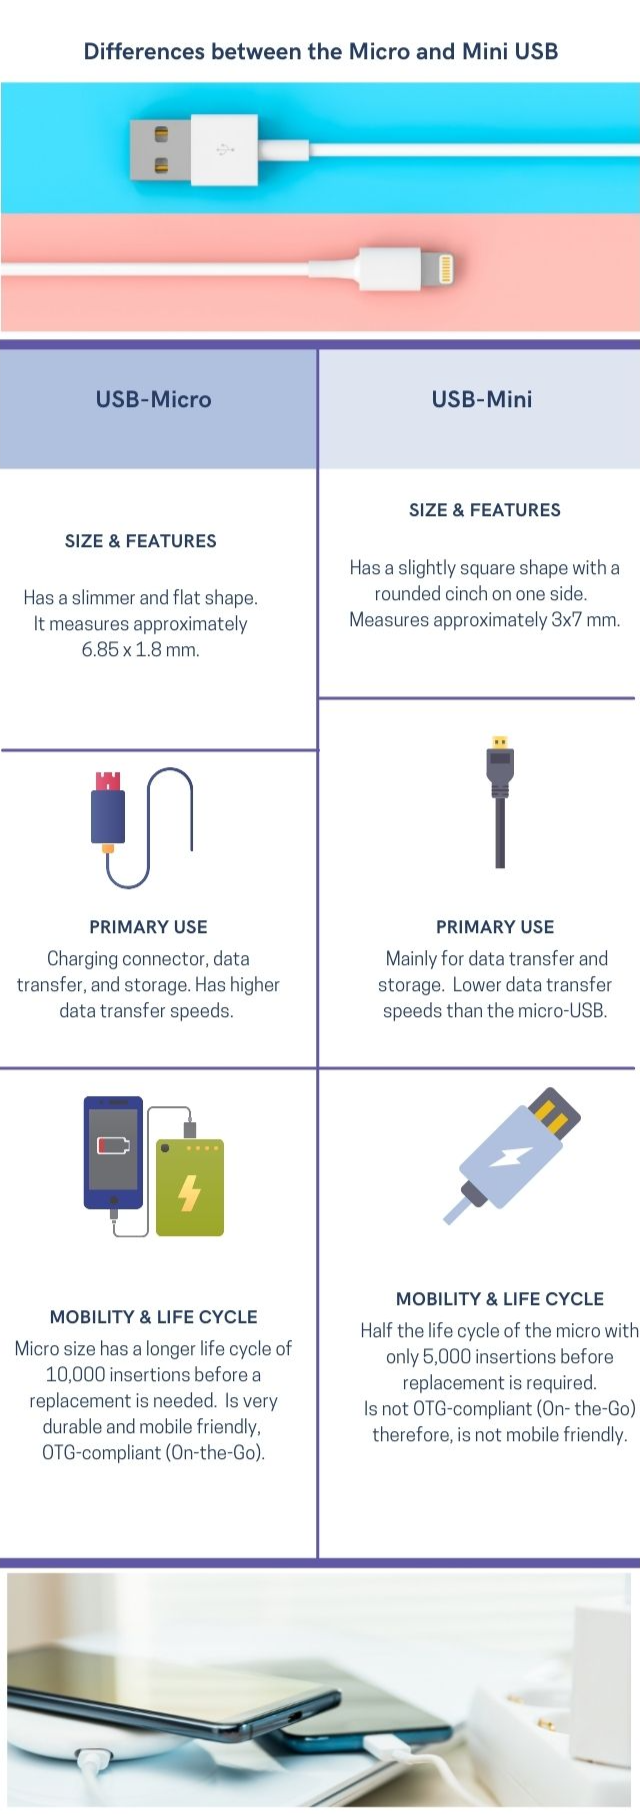 An infographic showing the differences between micro and mini USB features (see the audio file below for more details)